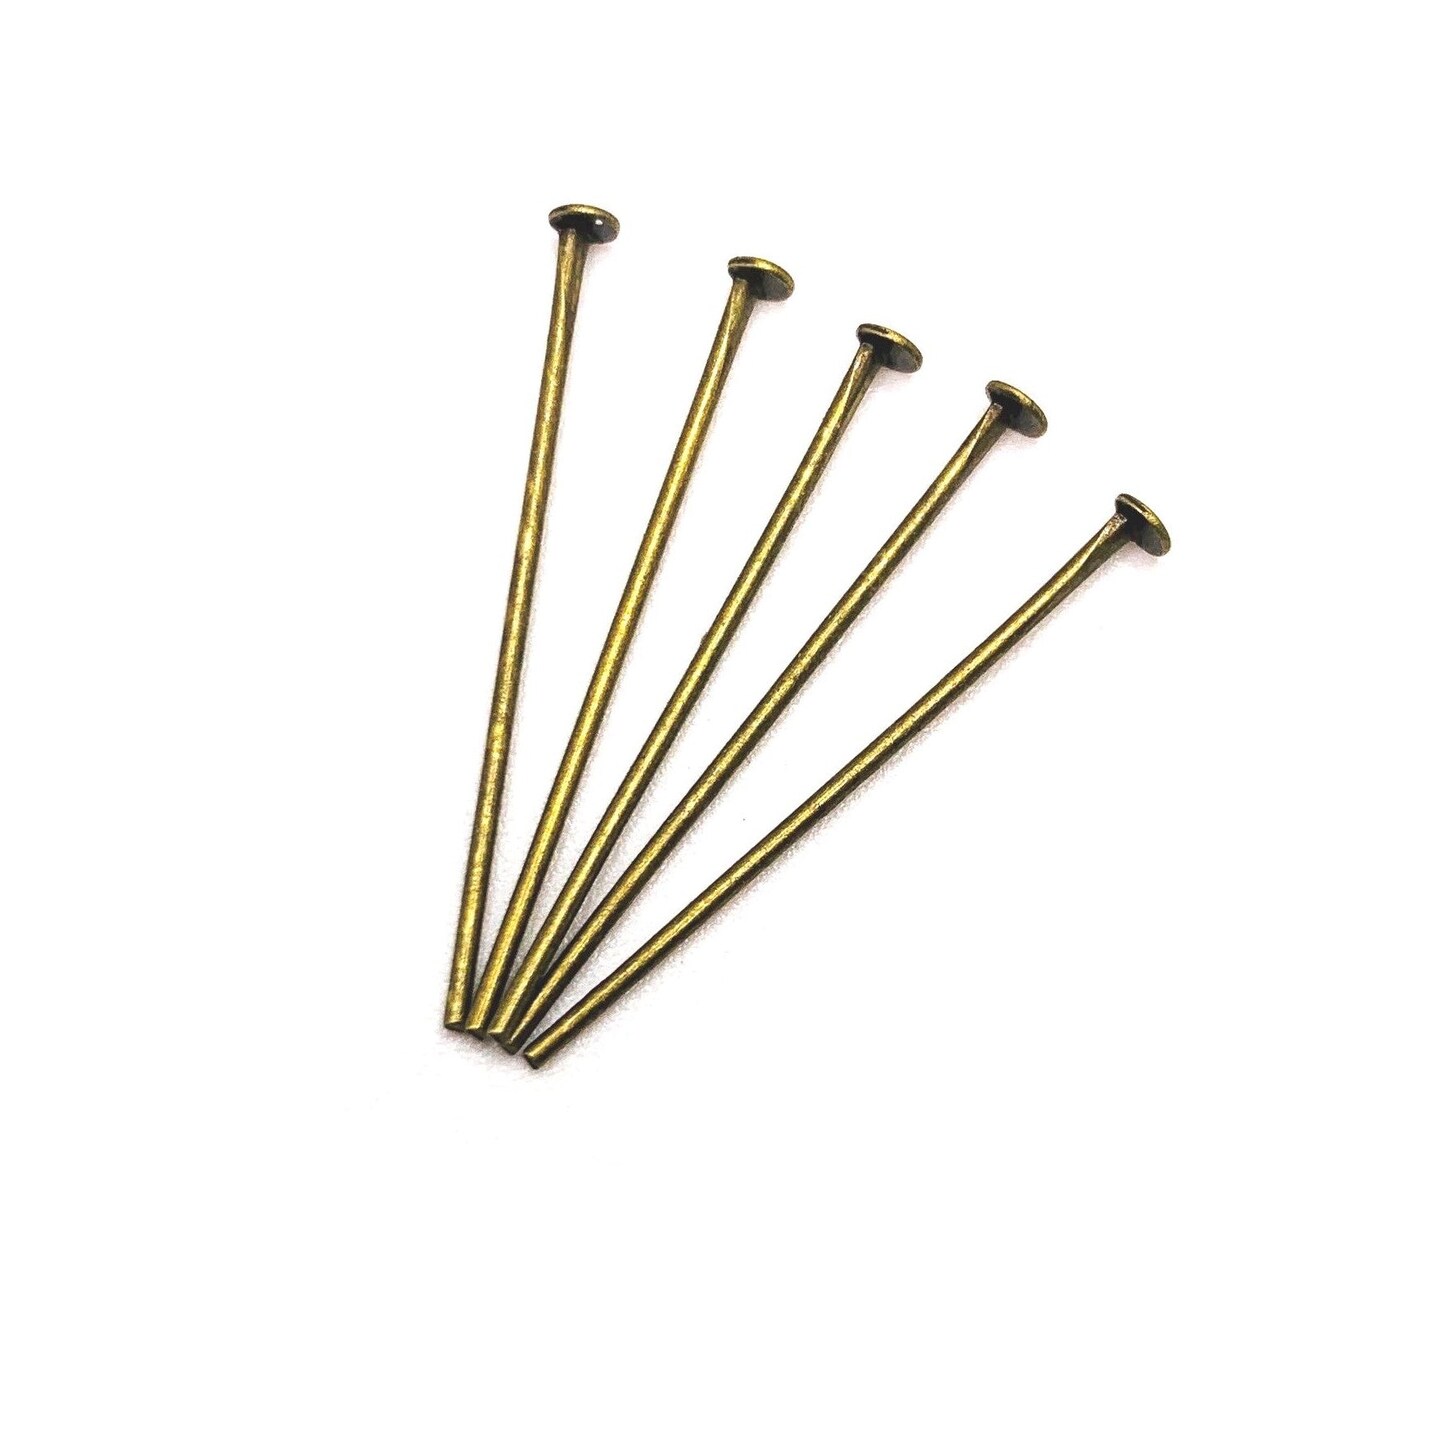 100 or 500 Pieces: 26 mm Bronze Head Pins, 20g